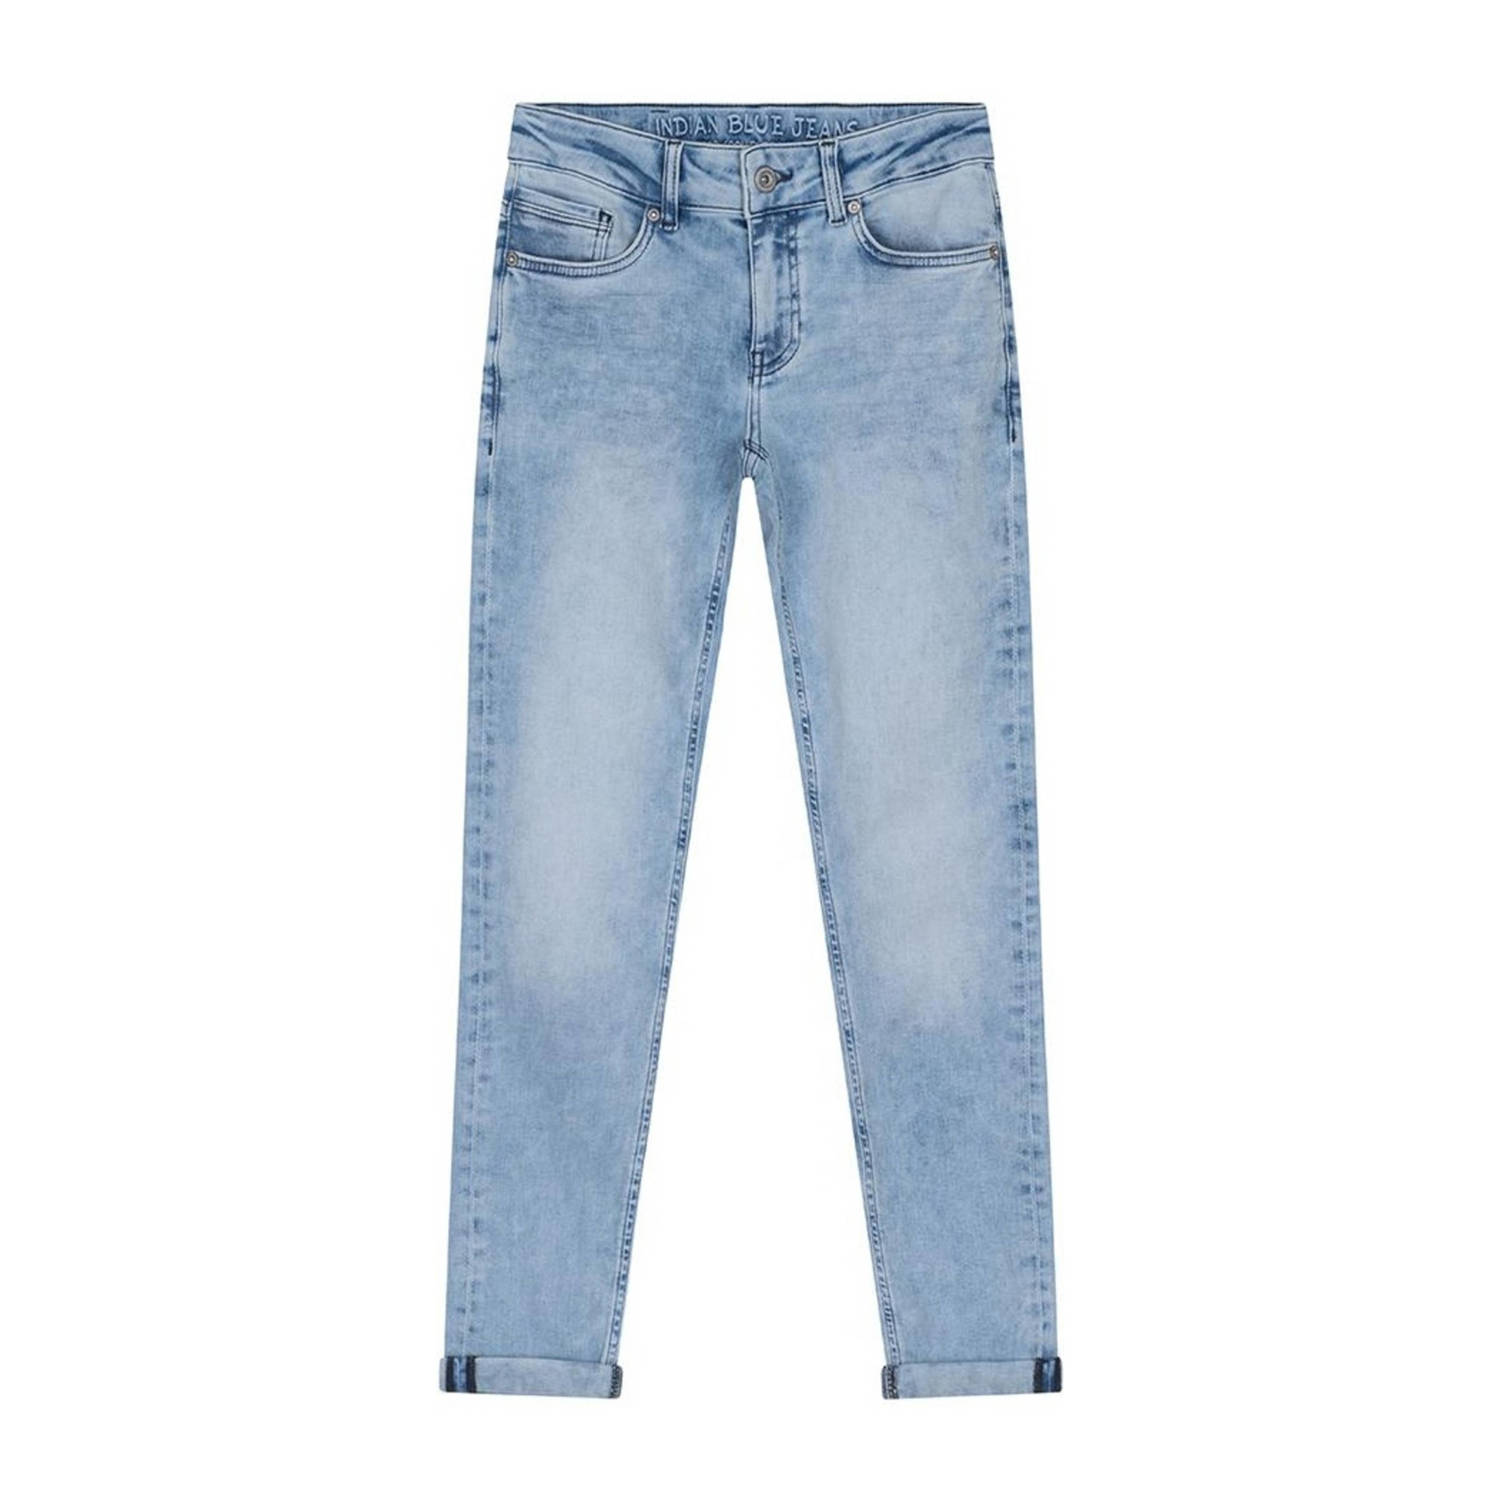 INDIAN BLUE JEANS Jongens Jeans Max Straight Fit Lichtblauw